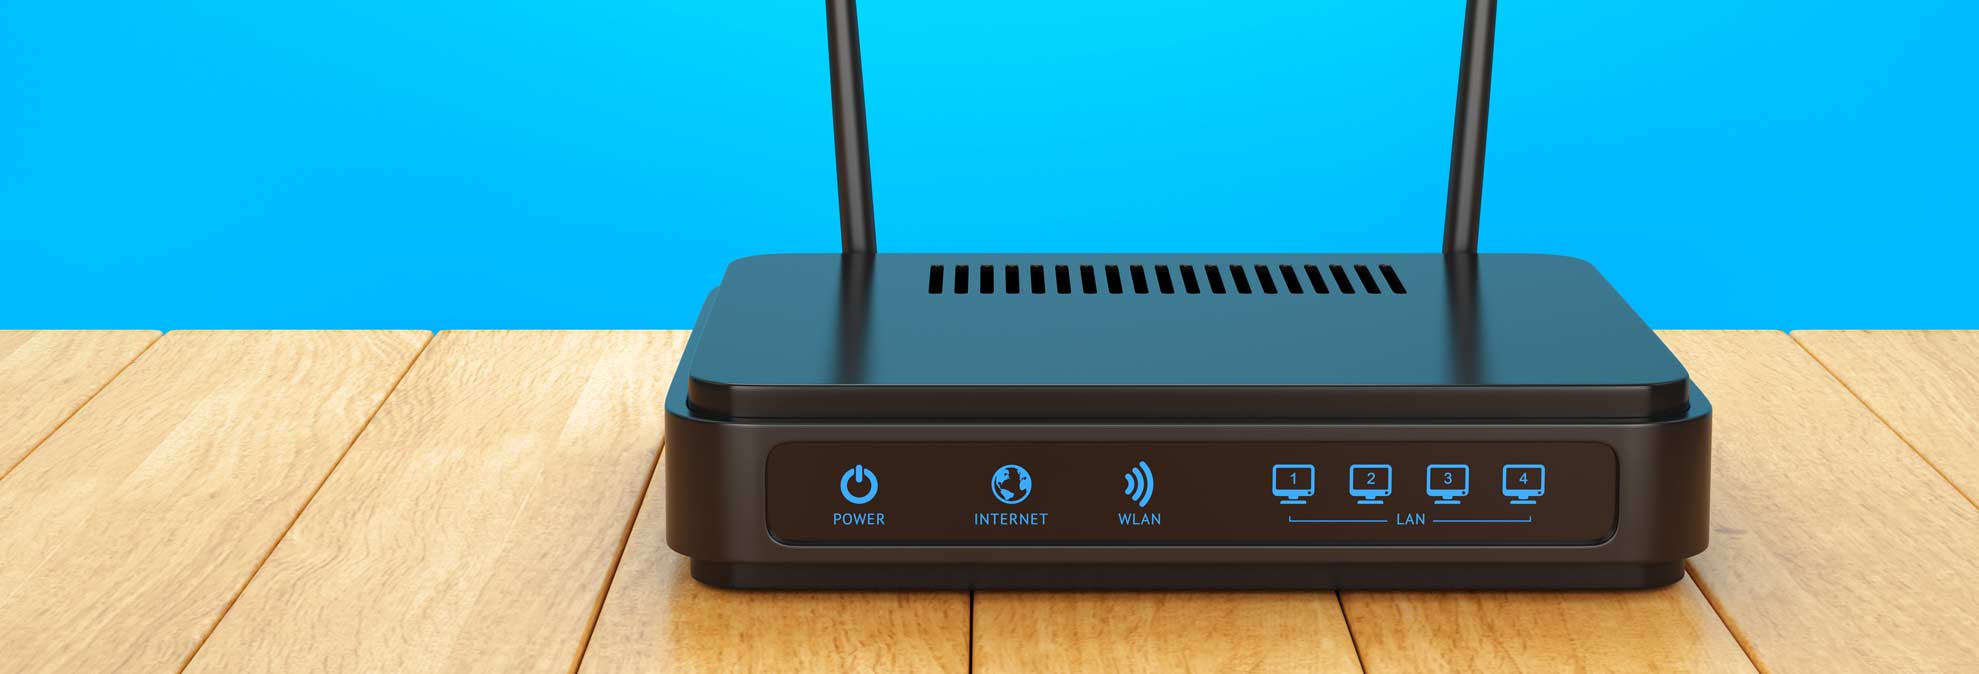 bad gateway linksys router